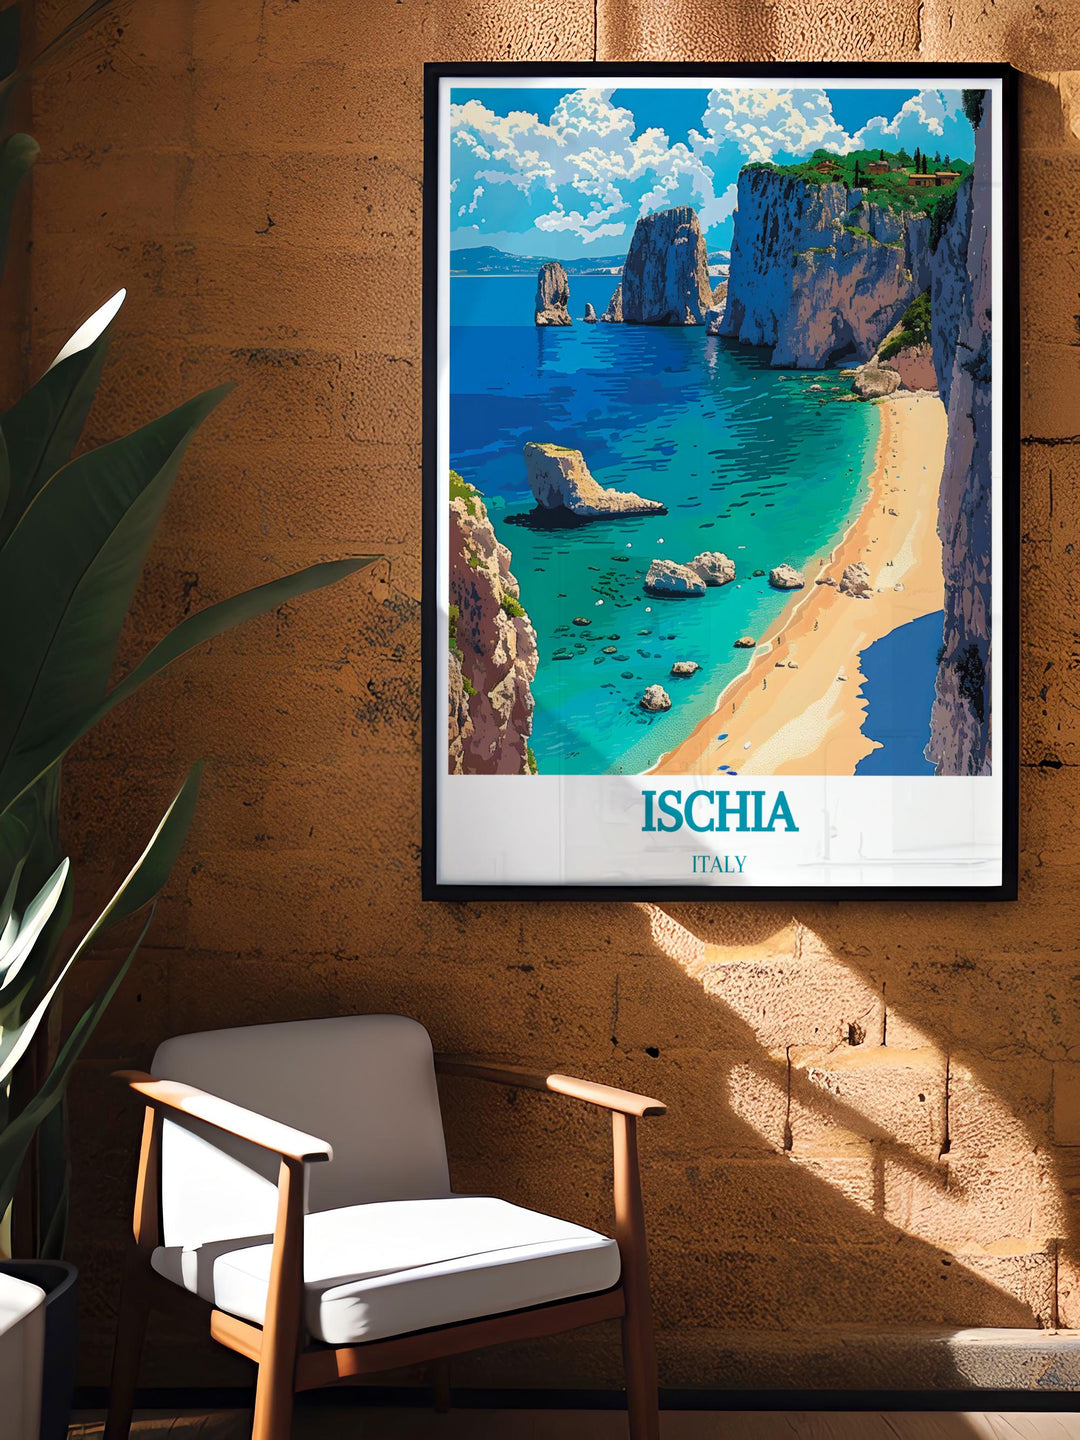 Decorative poster of Ischia illustrating the unique cultural and natural elements of the island ideal for gift giving